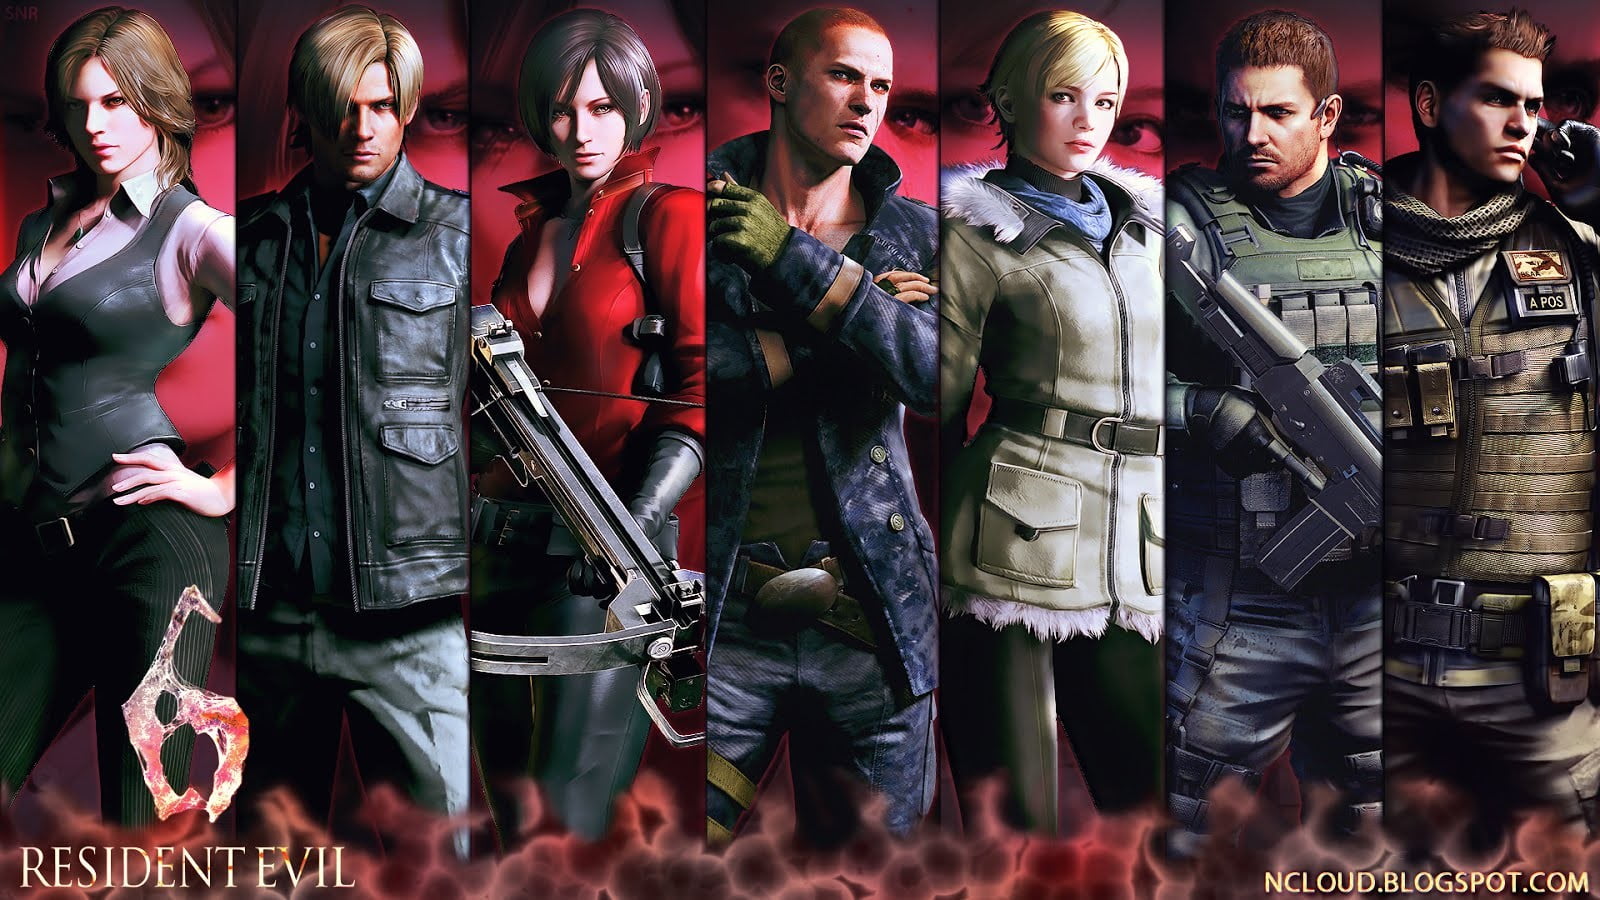 Resident Evil posters, video games, epica, Resident Evil, Resident Evil 6.....